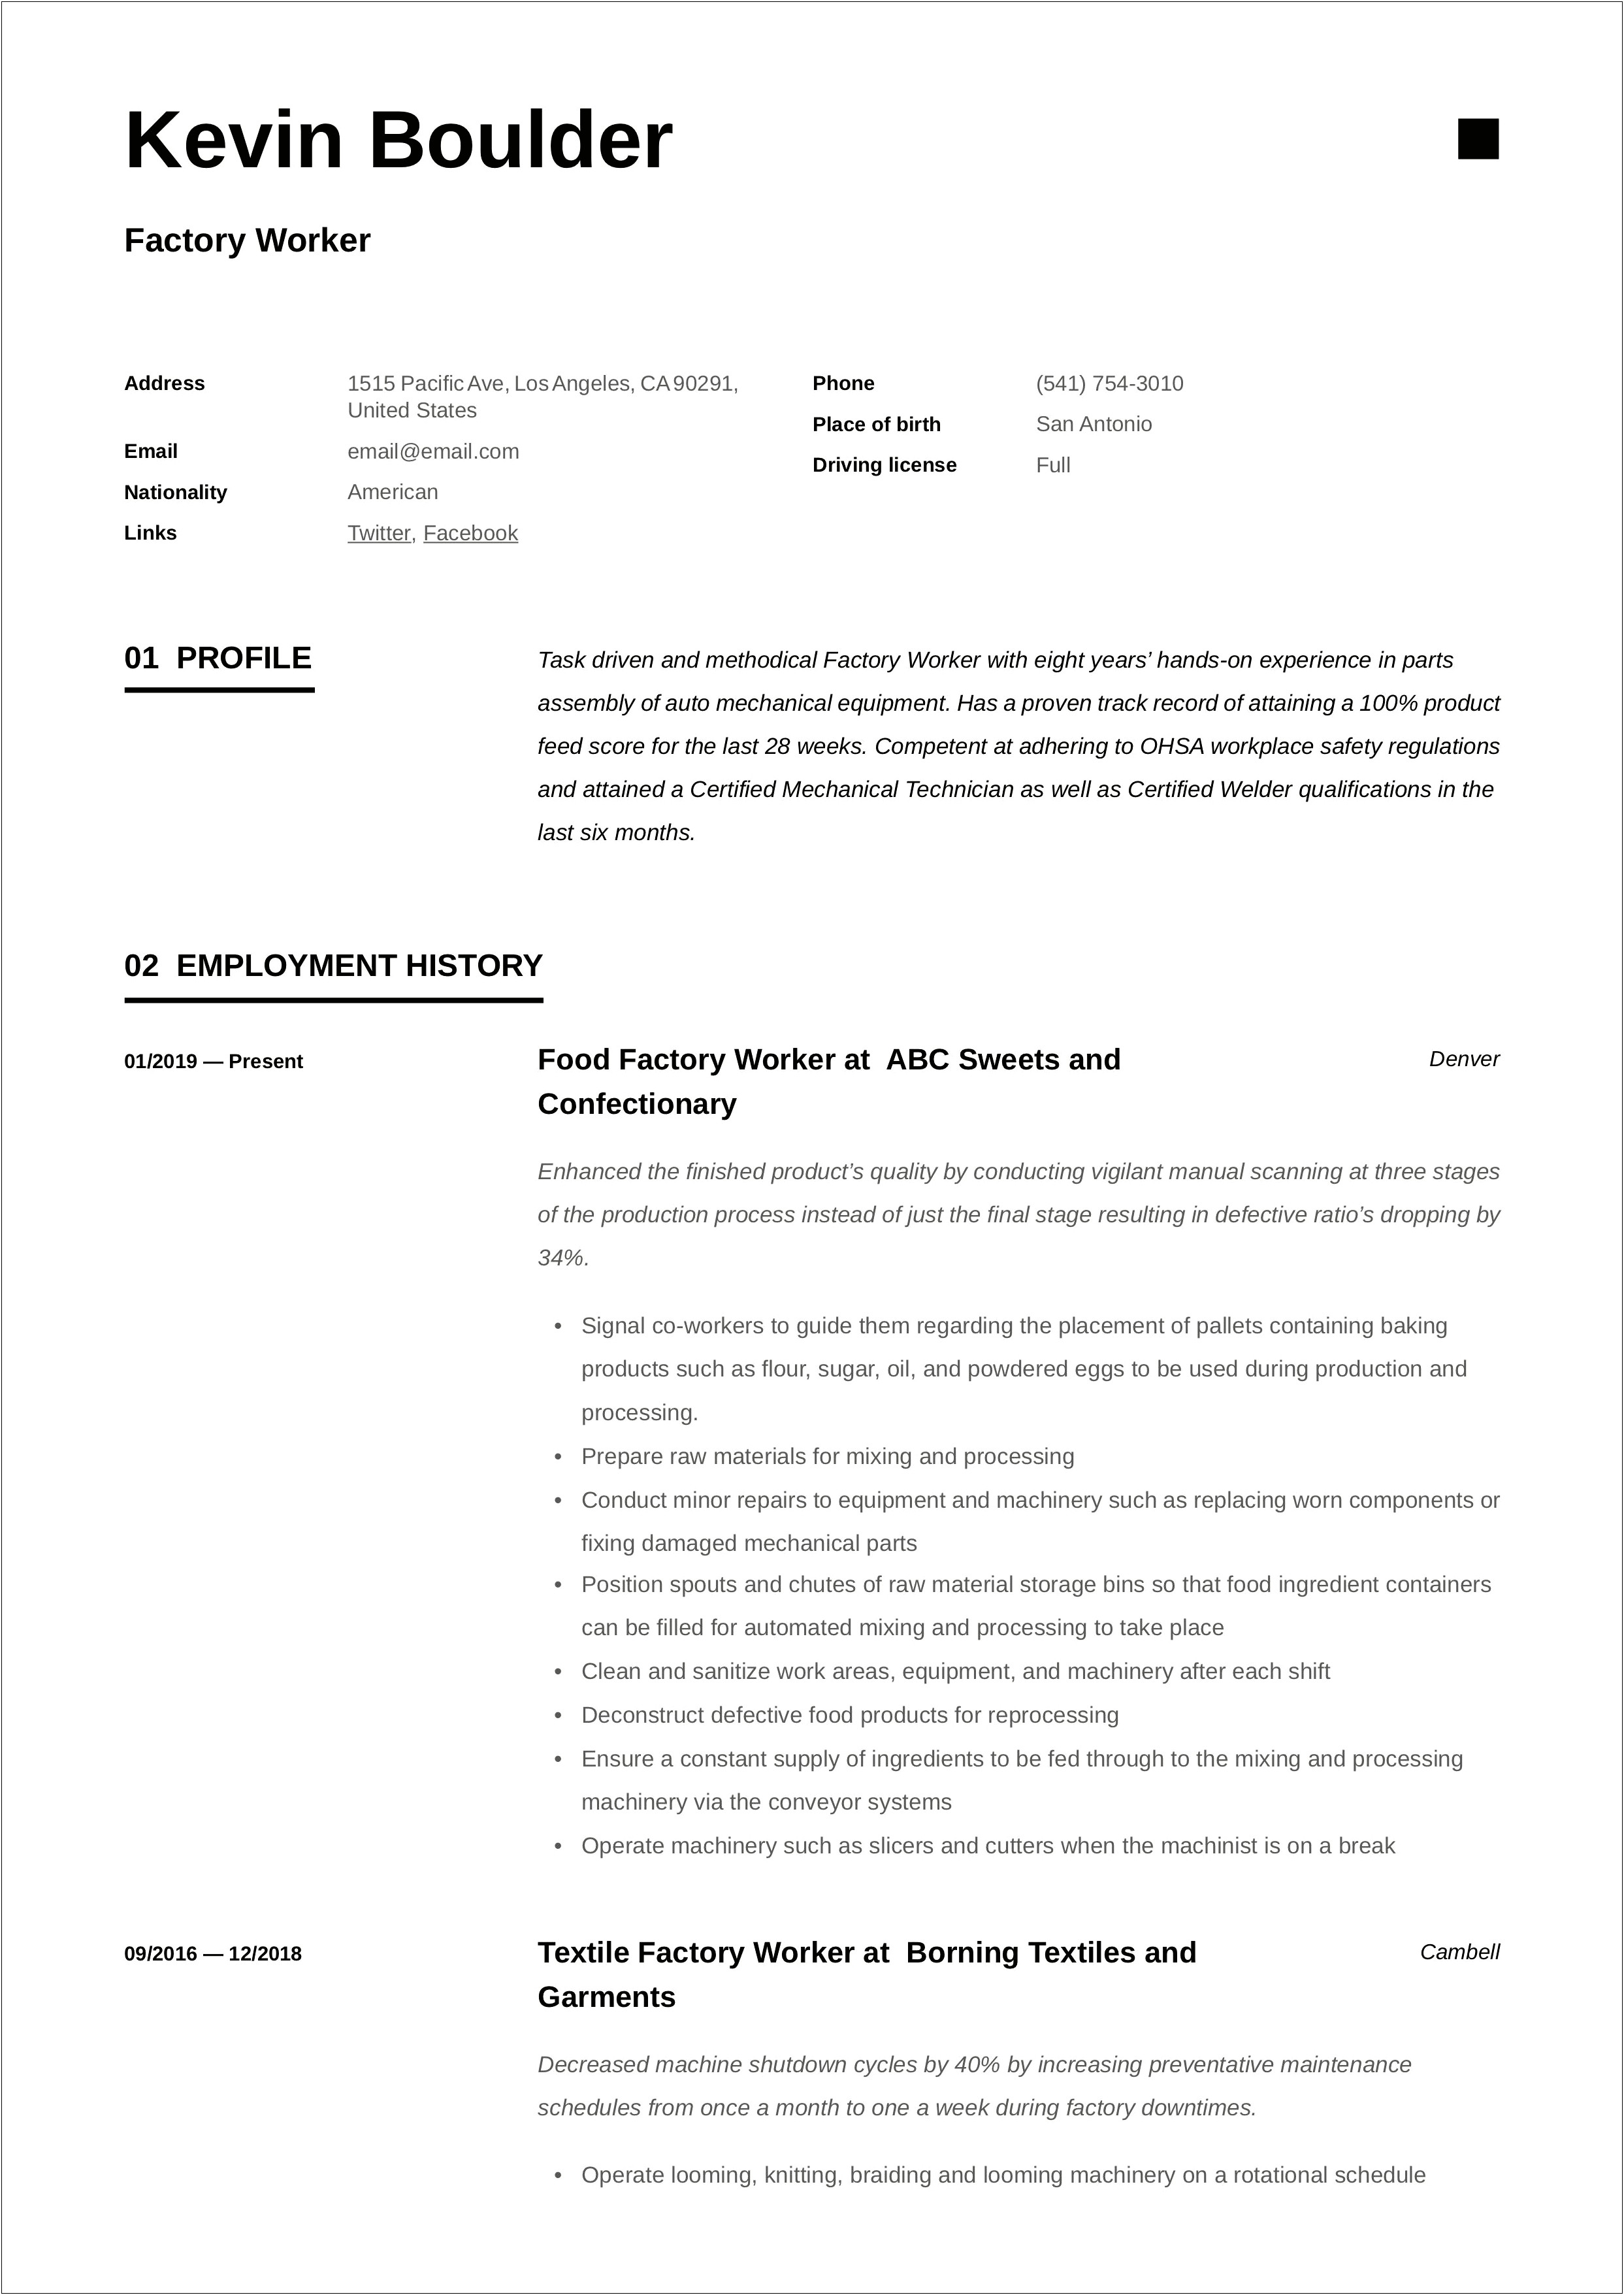 Resume Samples For Factory Employees